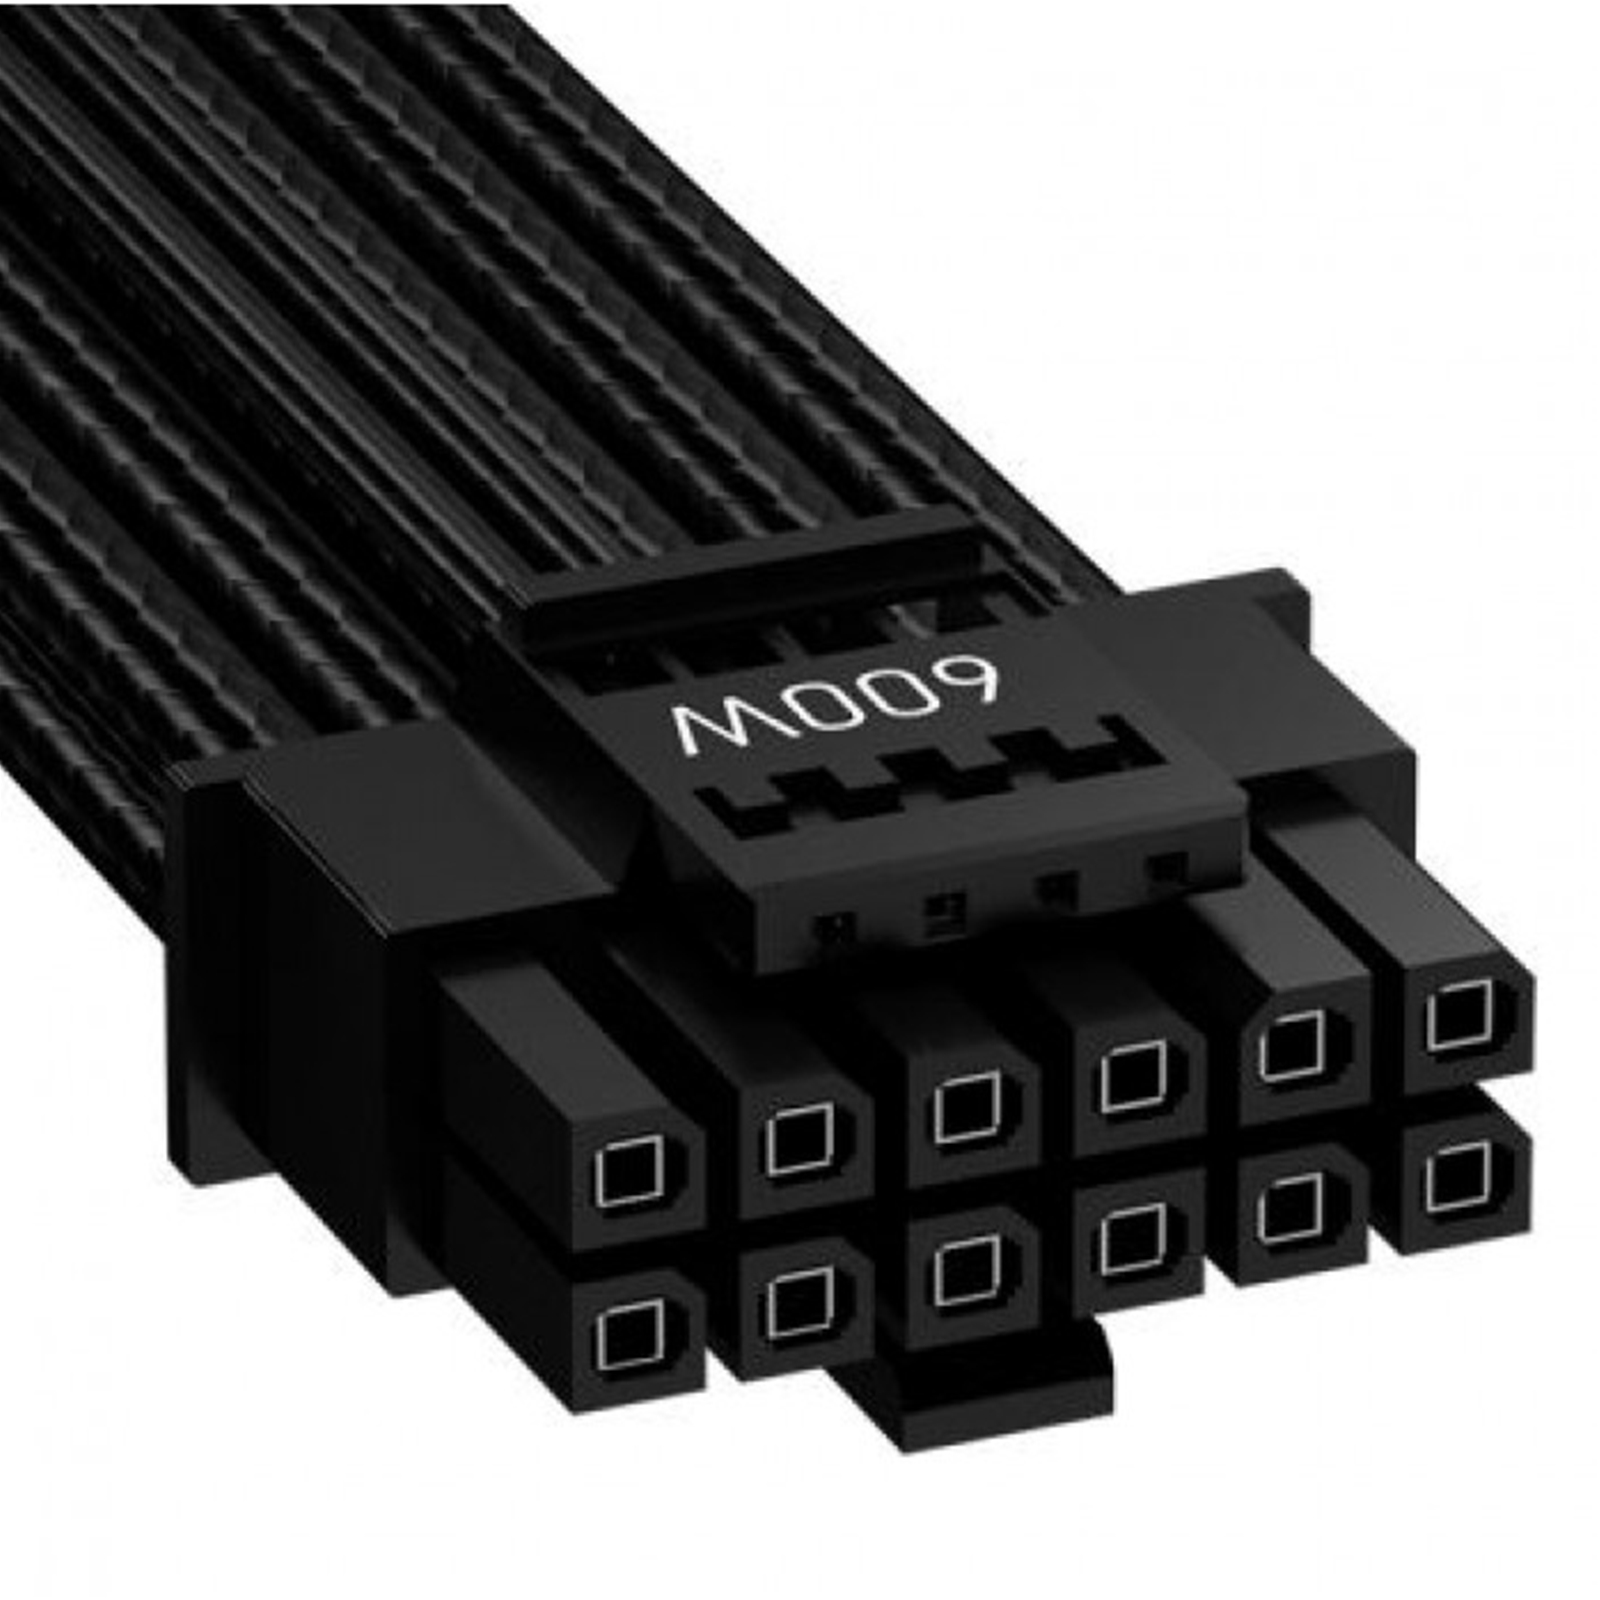 Antec 12VHPWR 2 x 8pin to 16-PIN (12+4) 600w, PCIE 5.0 Cable for Signature Power Supplies